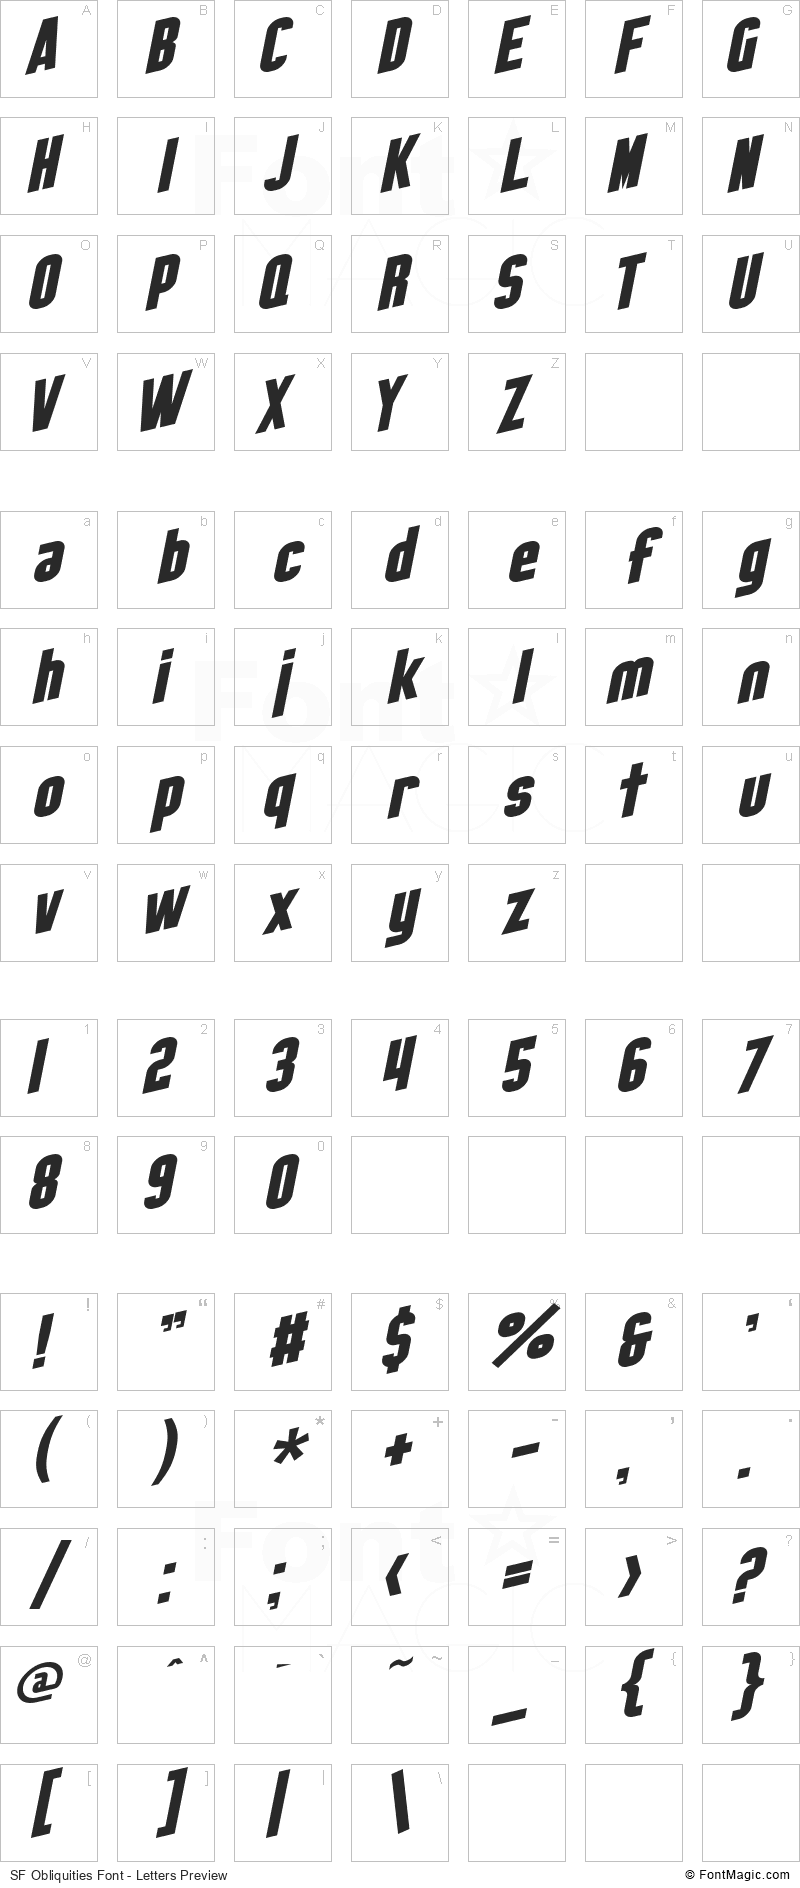 SF Obliquities Font - All Latters Preview Chart